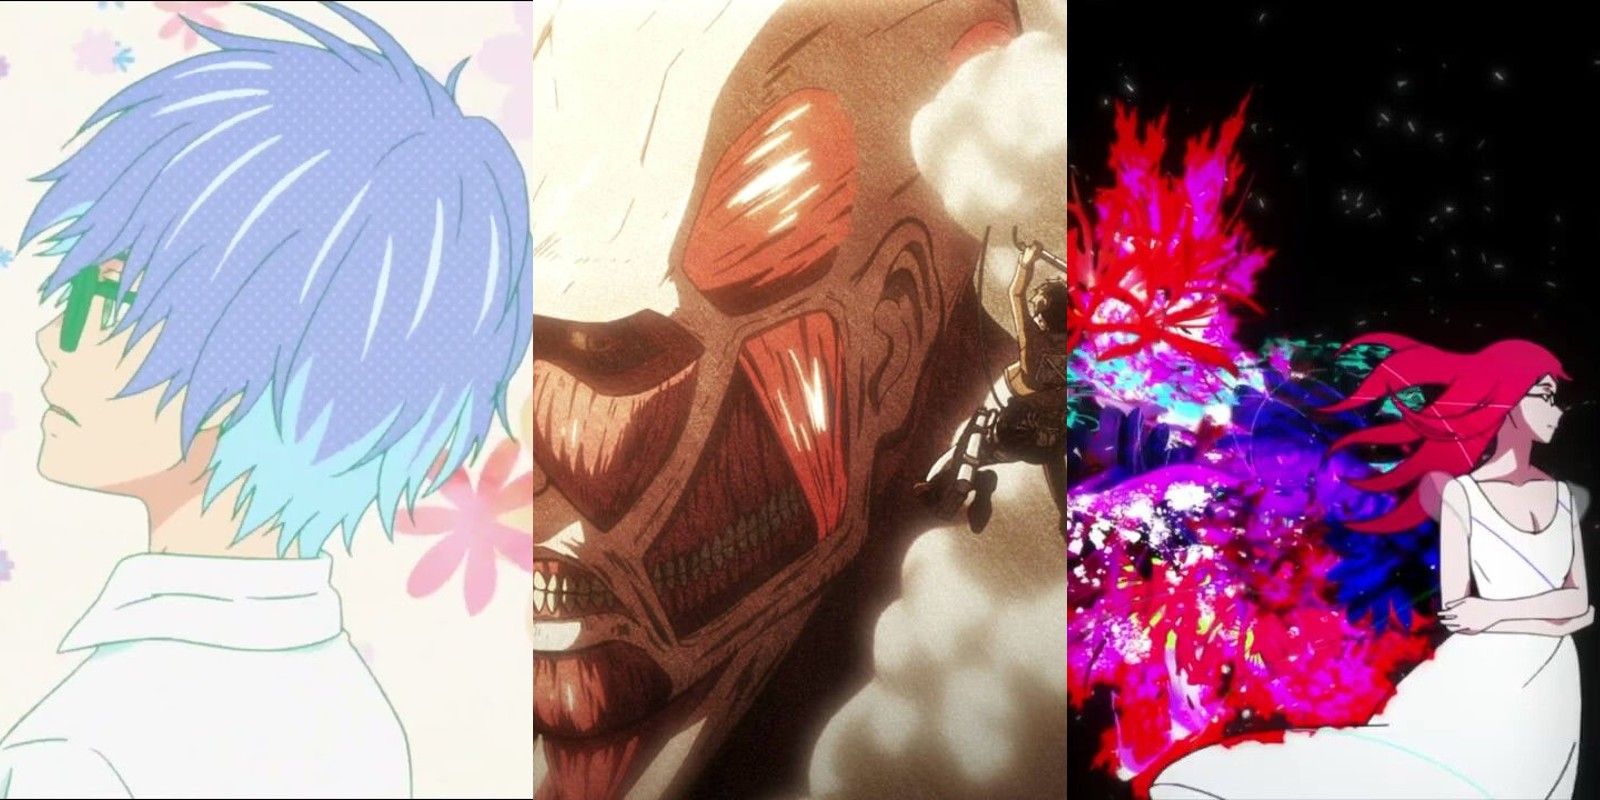 Openings for March comes in like a lion, Attack on titan, and Tokyo ghoul